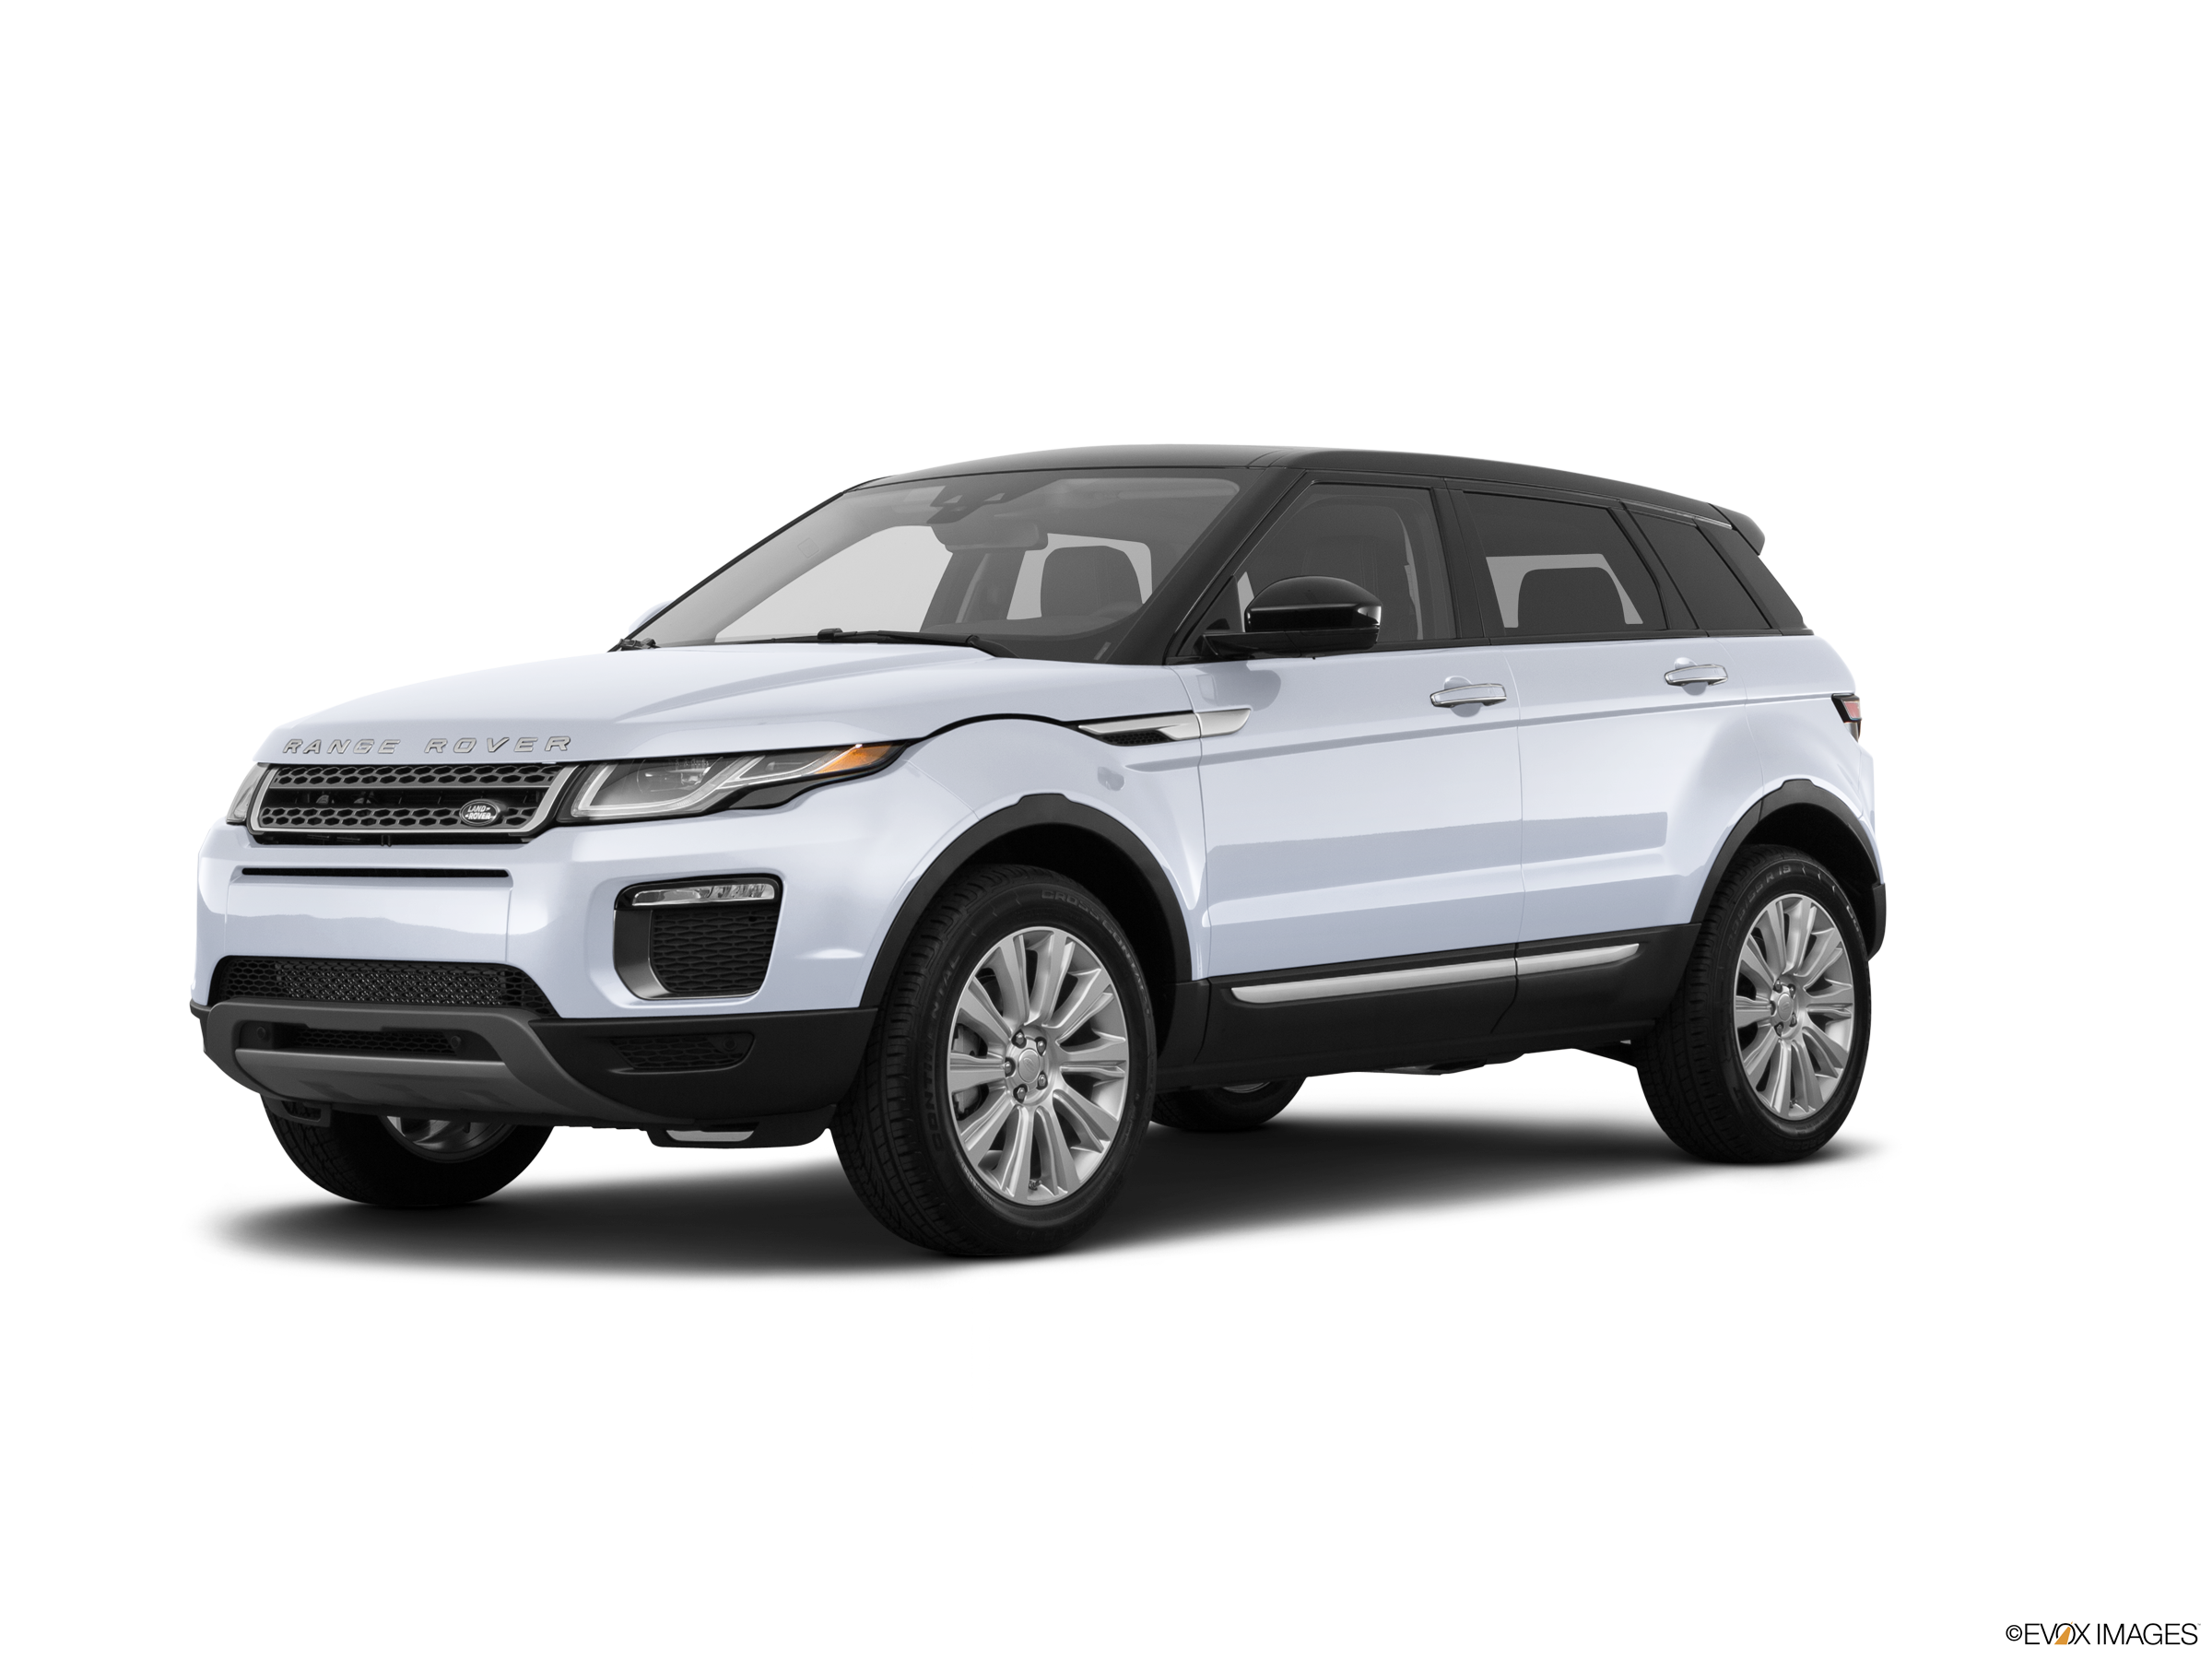 2018 Land Rover Range Rover Evoque Price, Value, Ratings & Reviews